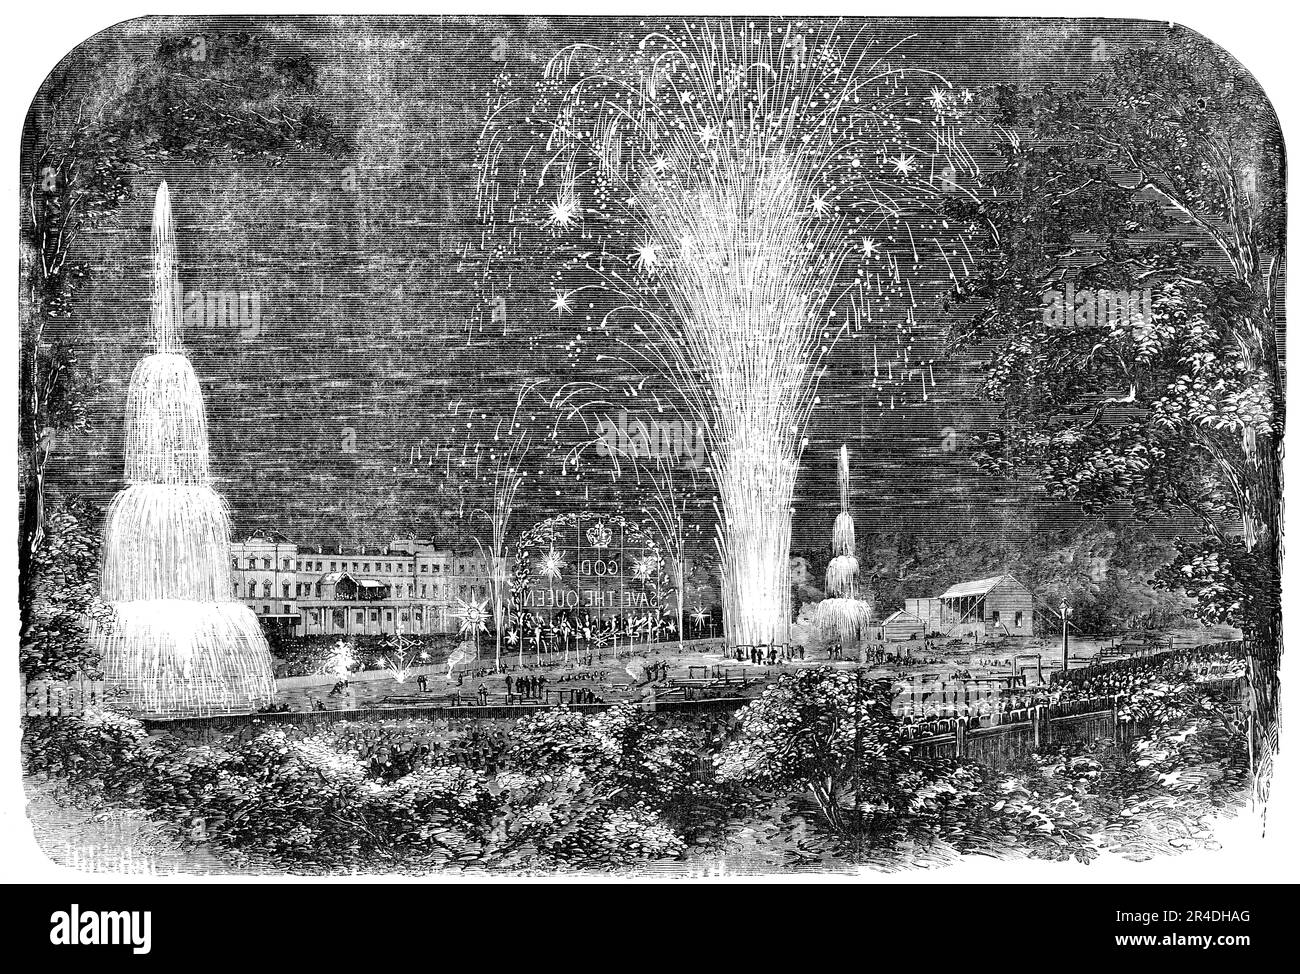 The Peace Commemoration at Lynn - the Fireworks in the Green-Park: the Grand Finale, 1856. Celebrating the end of the Crimean War in Norfolk: '...a display of fireworks on the Tuesday market-place'. The words &quot;God Save the Queen&quot; can be seen in lights. From &quot;Illustrated London News&quot;, 1856. Stock Photo